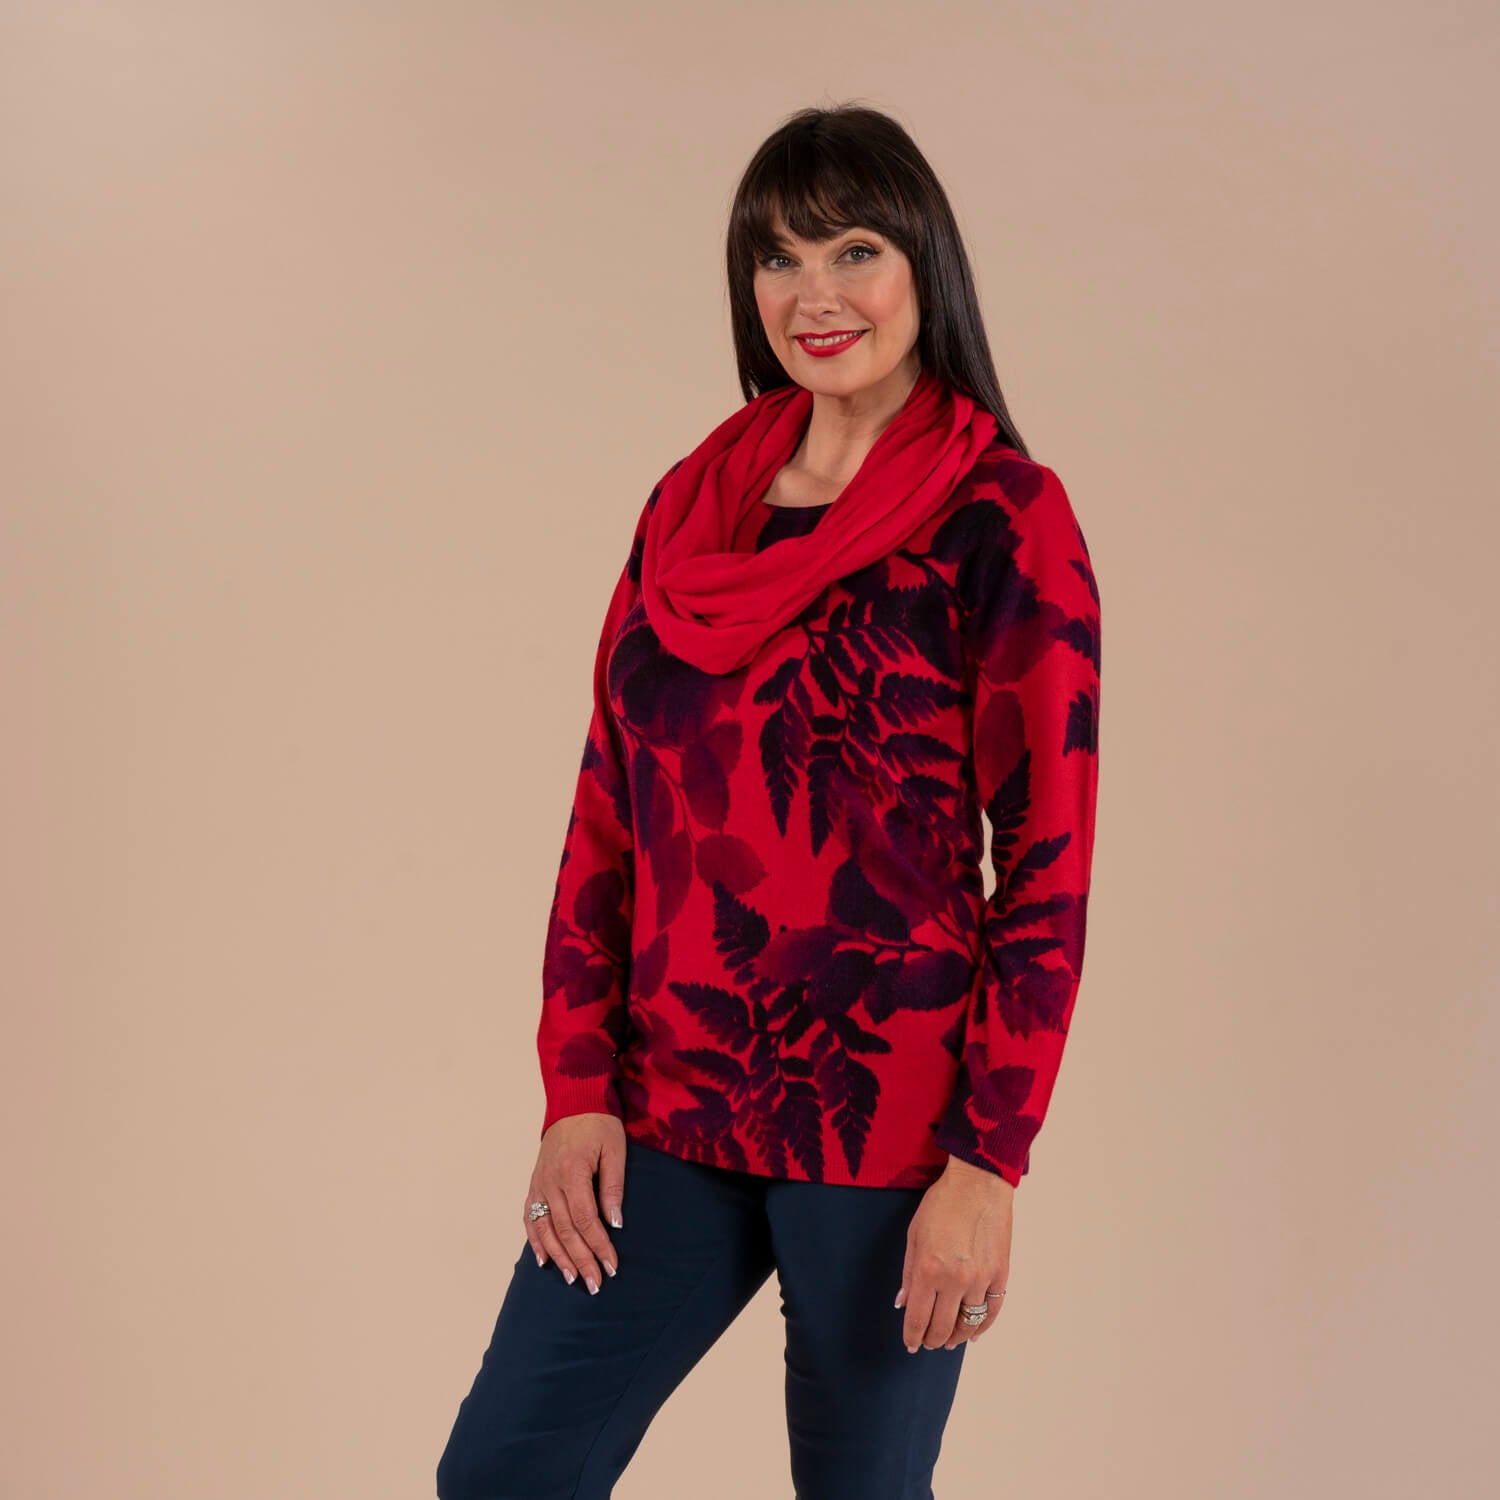 Tea Lane Scarf Floral Sweater - Red 5 Shaws Department Stores